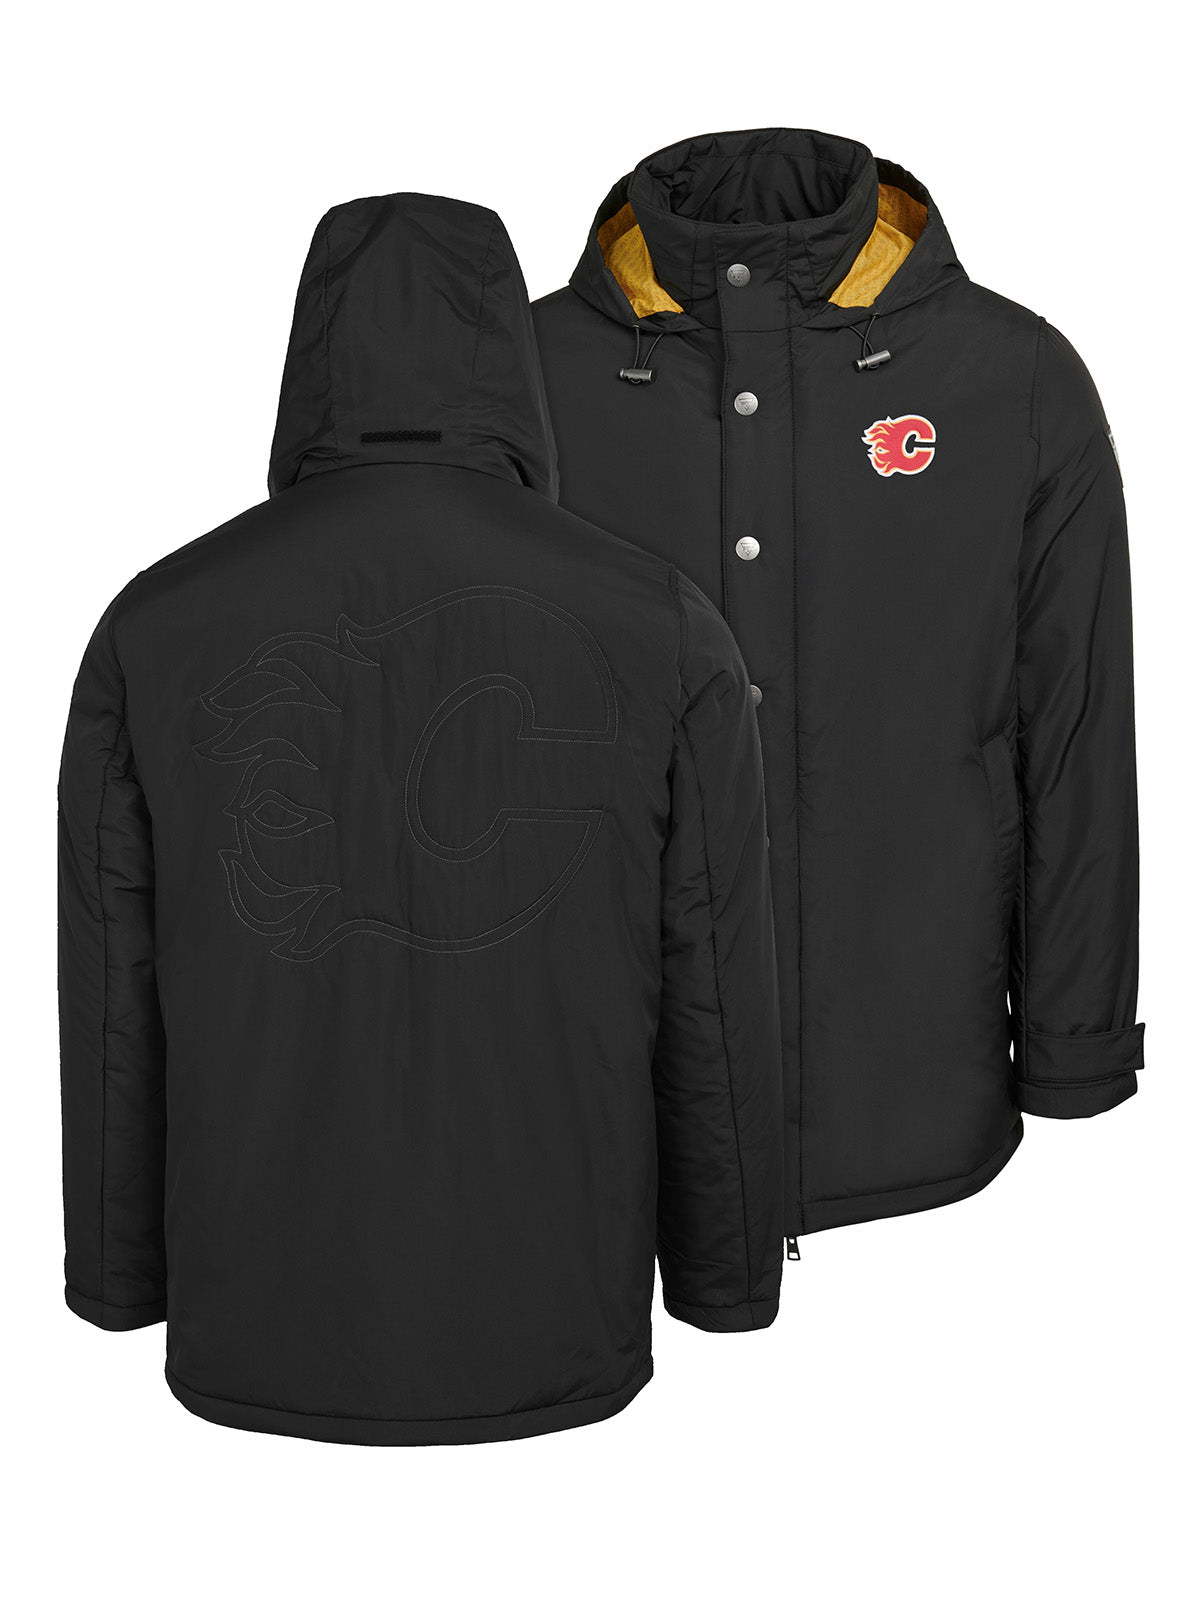 Calgary Flames Coach's Jacket - The jacket features a quilted stitch of the Calgary Flames logo centered on the back and has a removal hood in the team colors, elevating this NHL hockey clothing collection